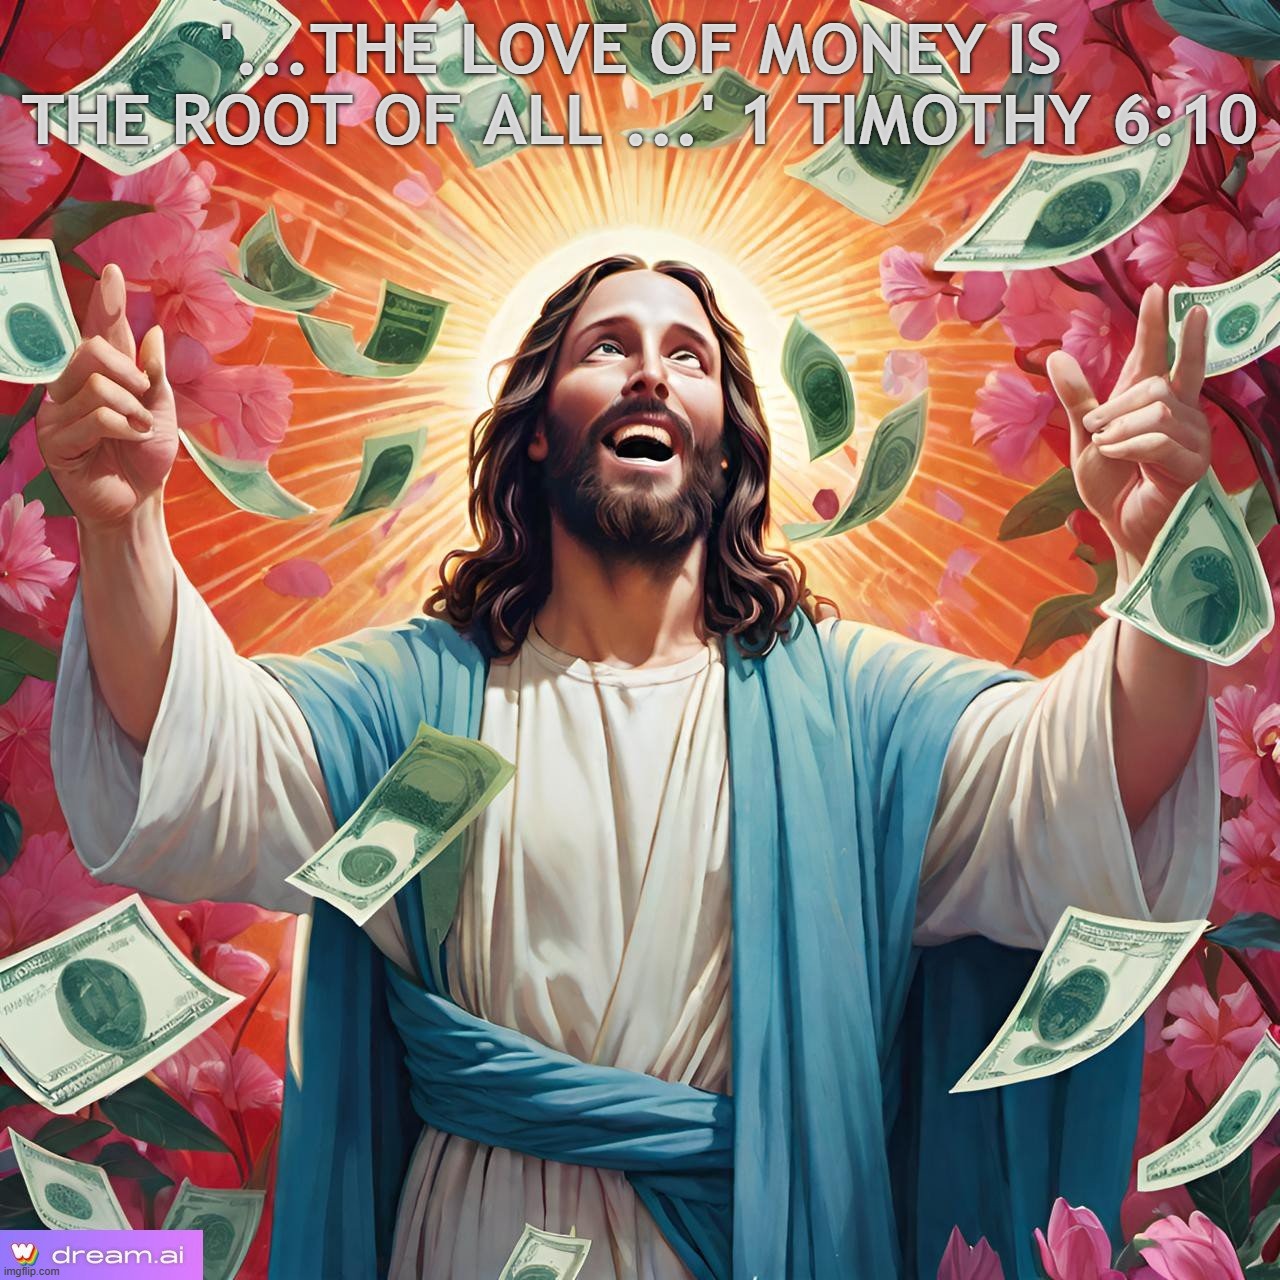 '... The Love of Money is the Root of All ...' 1 Timothy 6:10 | '...THE LOVE OF MONEY IS THE ROOT OF ALL ...' 1 TIMOTHY 6:10 | image tagged in jesus,christ,money,mint,love,ecstatic | made w/ Imgflip meme maker